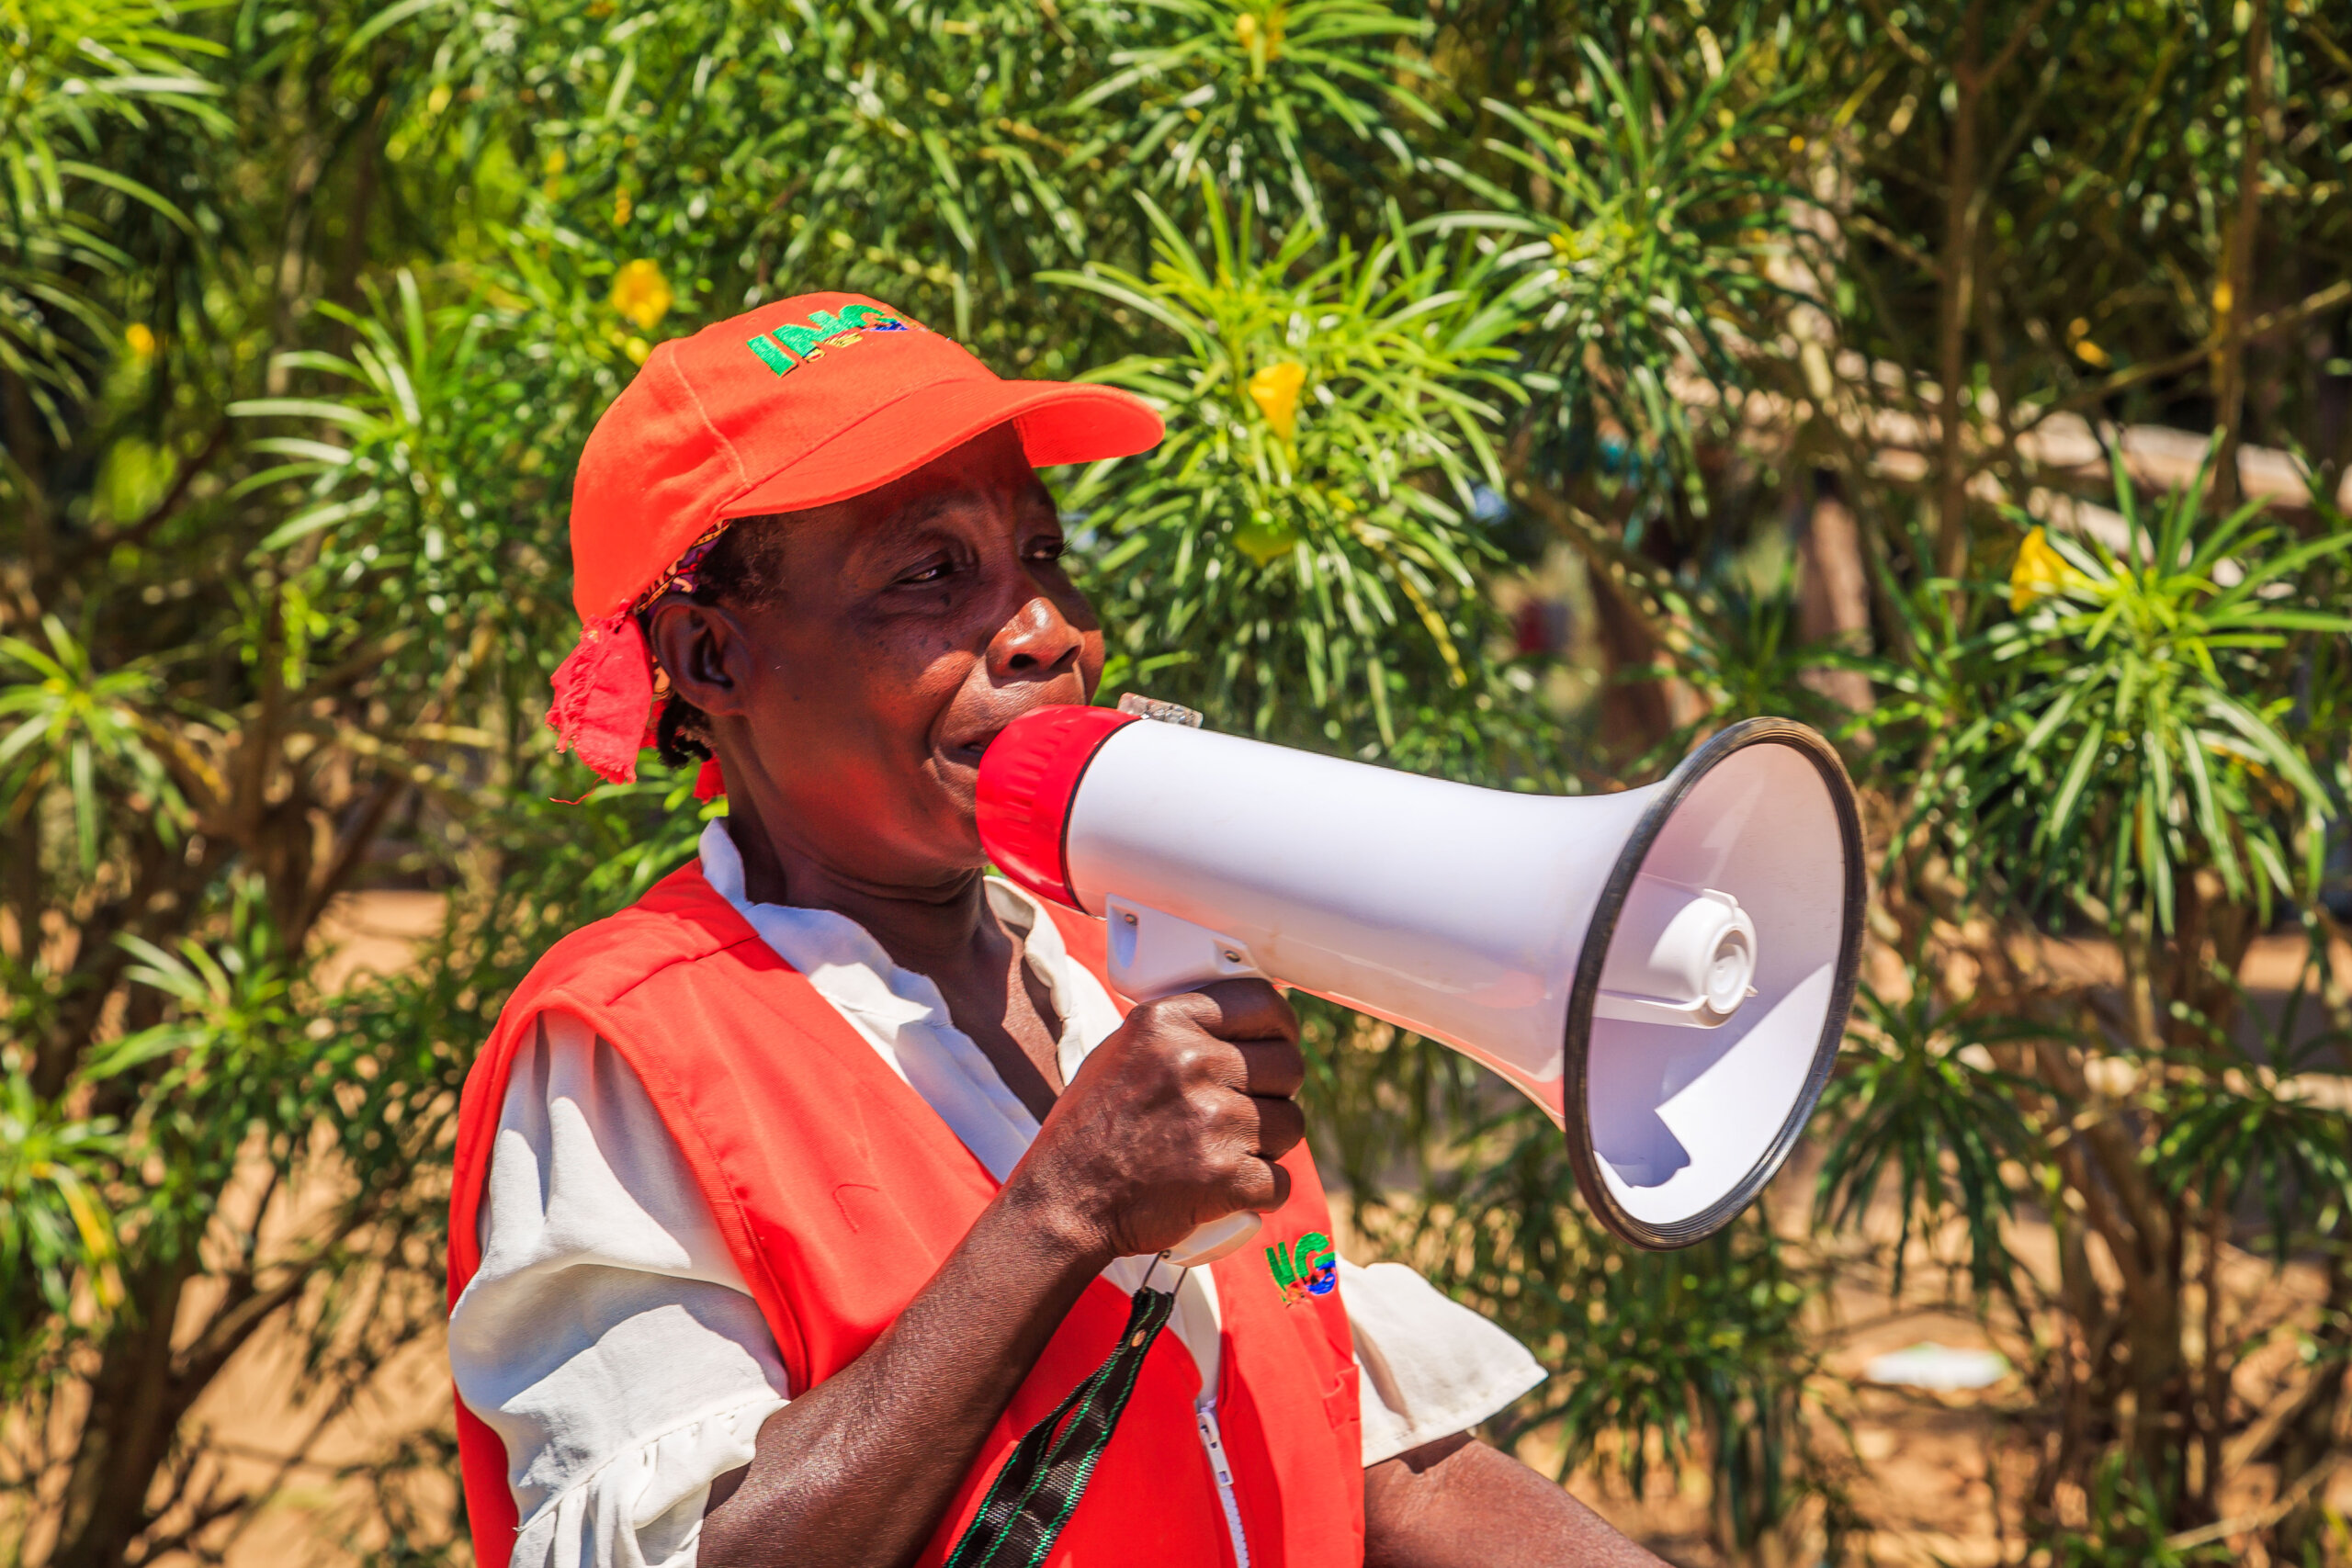 A woman takes part in a Cyclone Simulation exercise in Buzi, Mozambique as part of the ICDP project, funded by Austrian Development Agency. Gender is mainstreamed throughout the project, ensuring that women and girls with disabilities are included in creating emergency response plans to climate-related disasters. She is wearing an bright orange hat and vest, and is using a megaphone. She's standing outside in front of some vegetation.